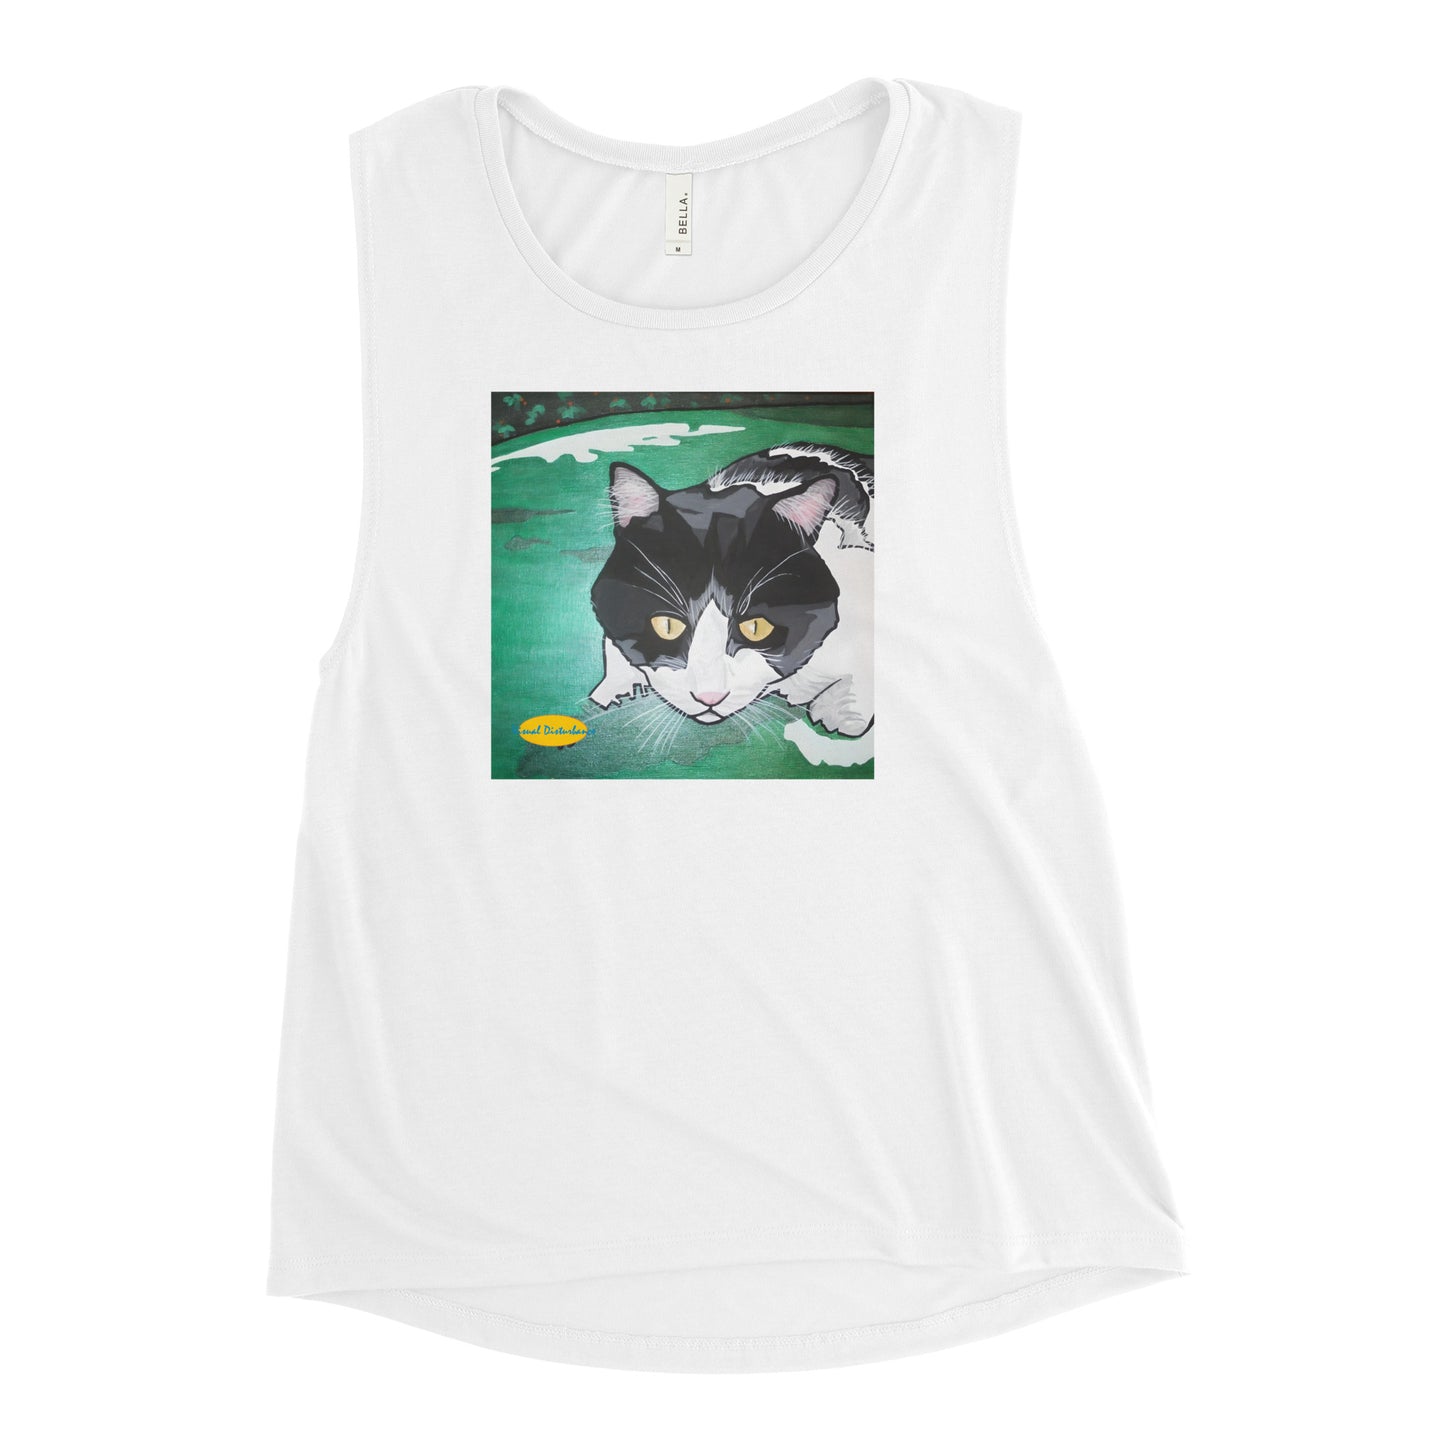 Black and White Cat in Green Grass Ladies’ Muscle Tank